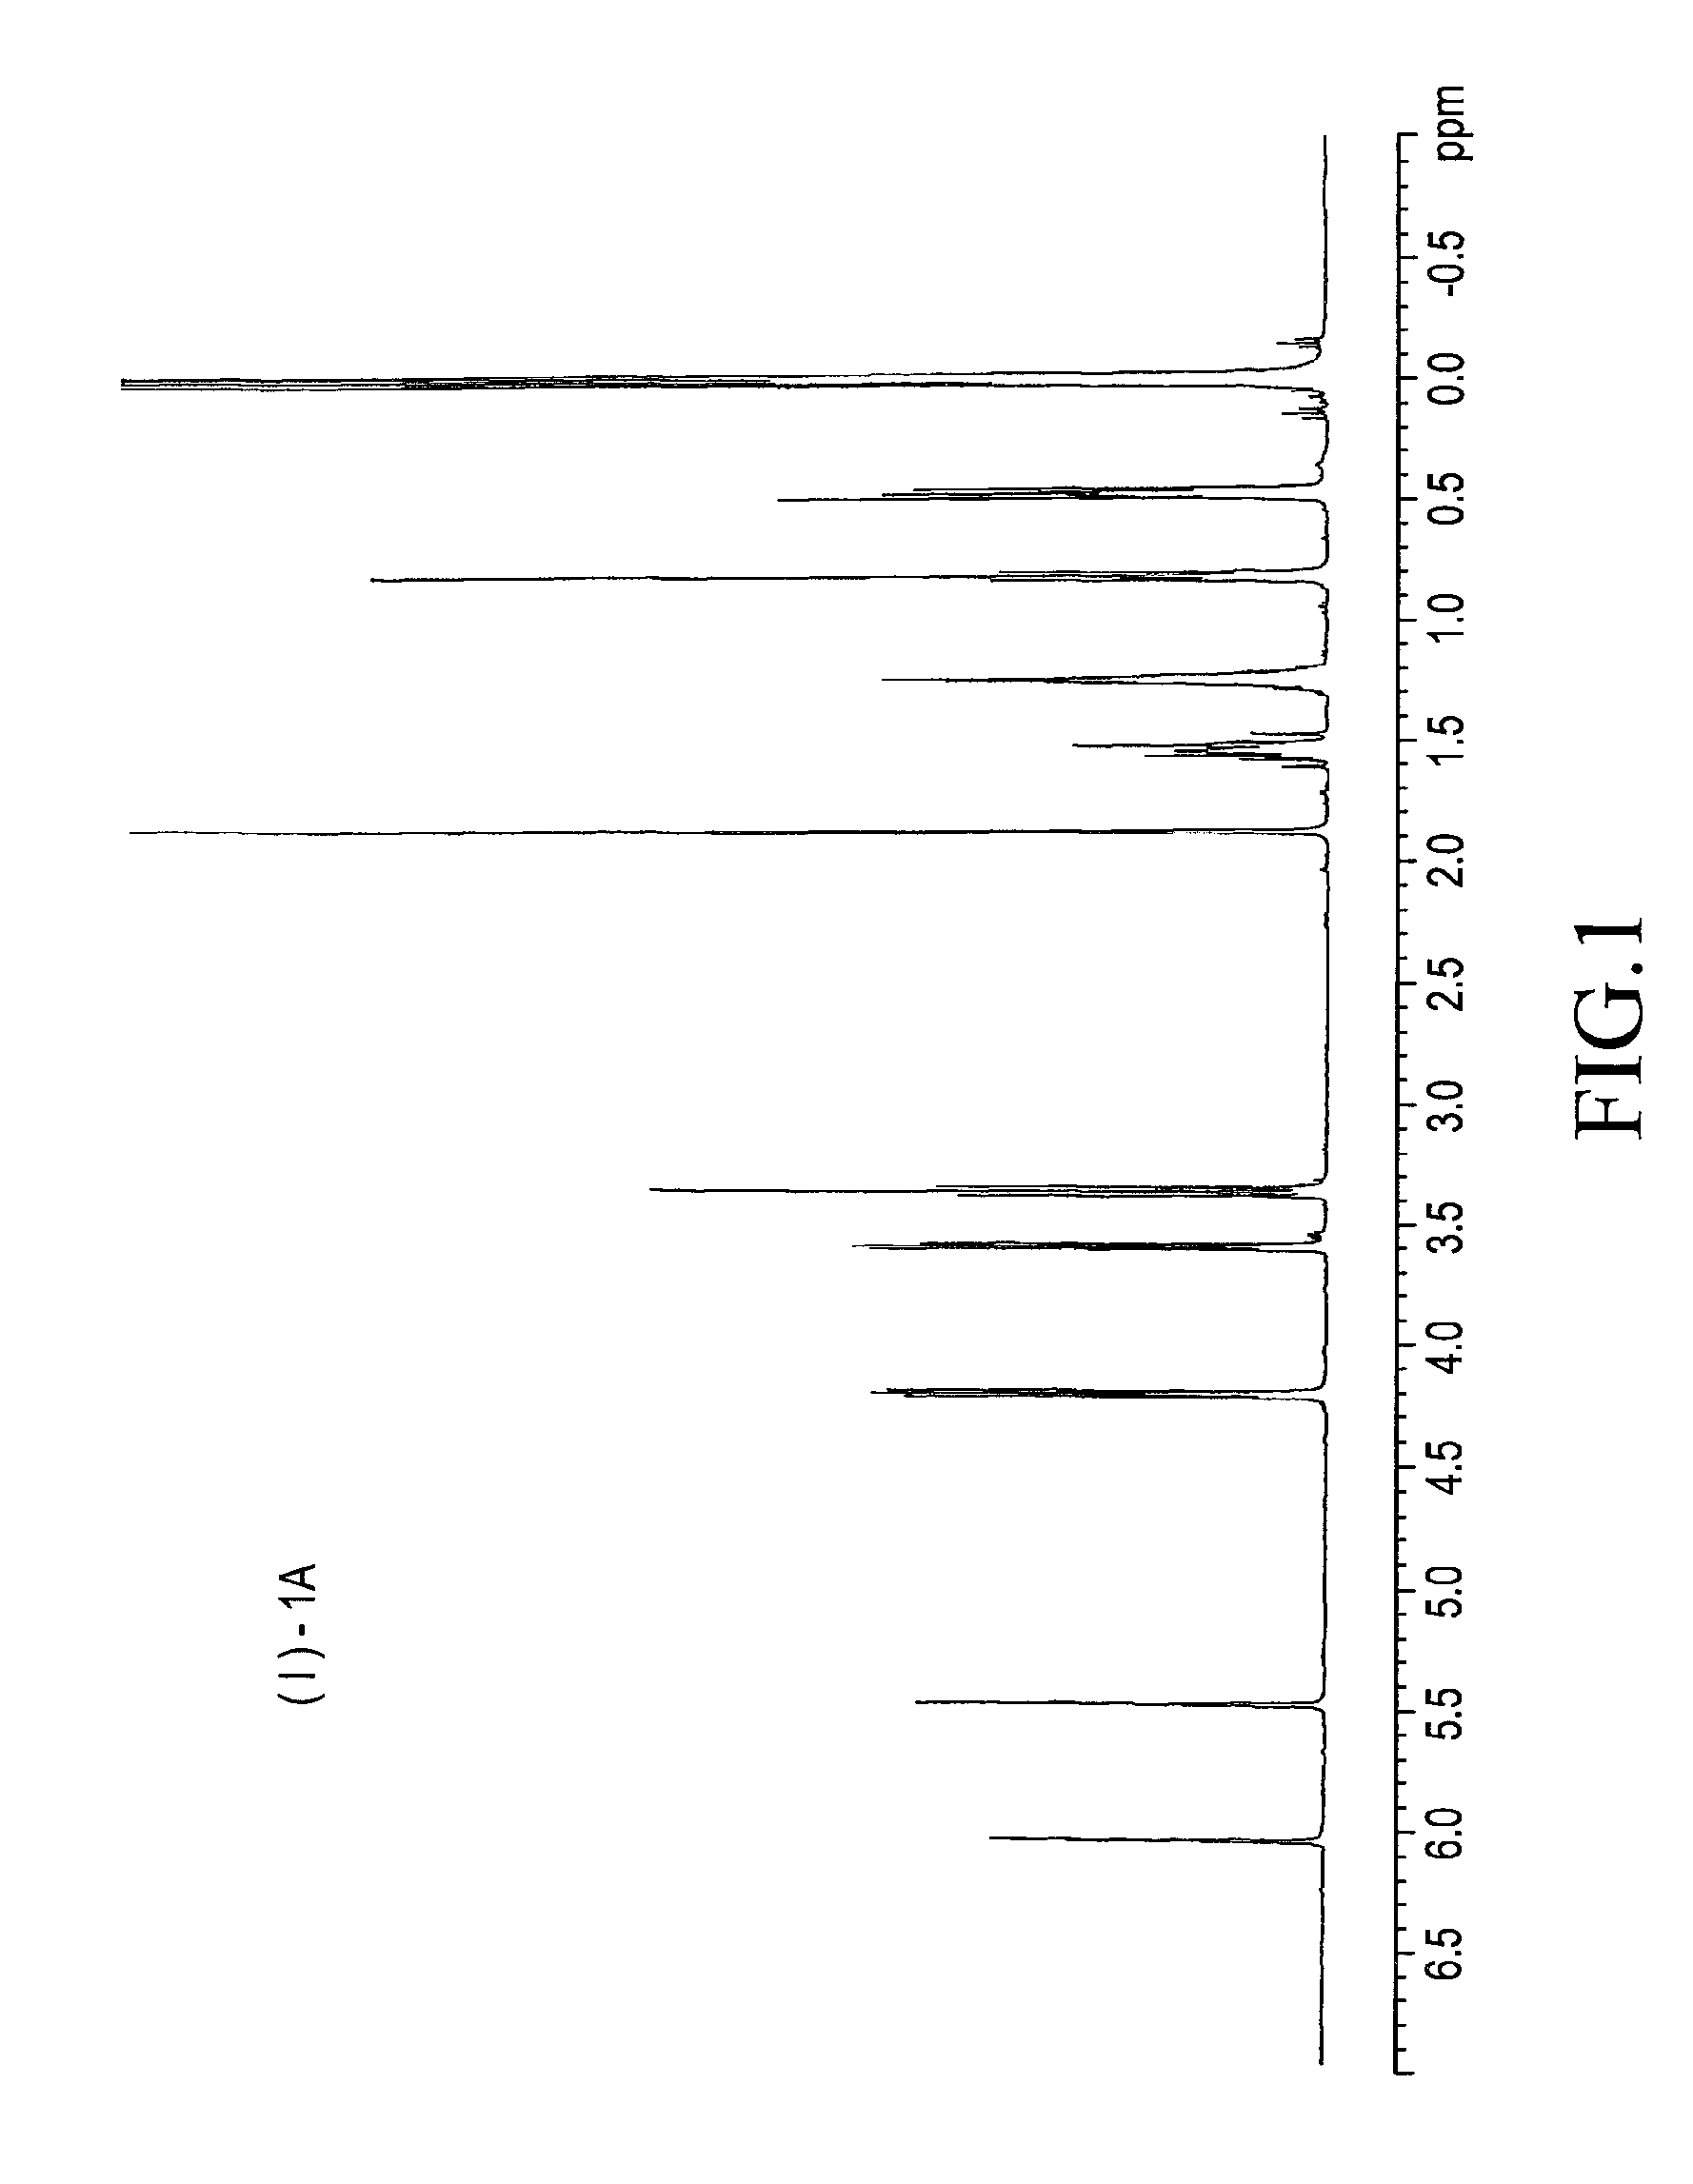 Silicone compound, a process for the preparation thereof and a process for the preparation of an ophthalmic device therefrom